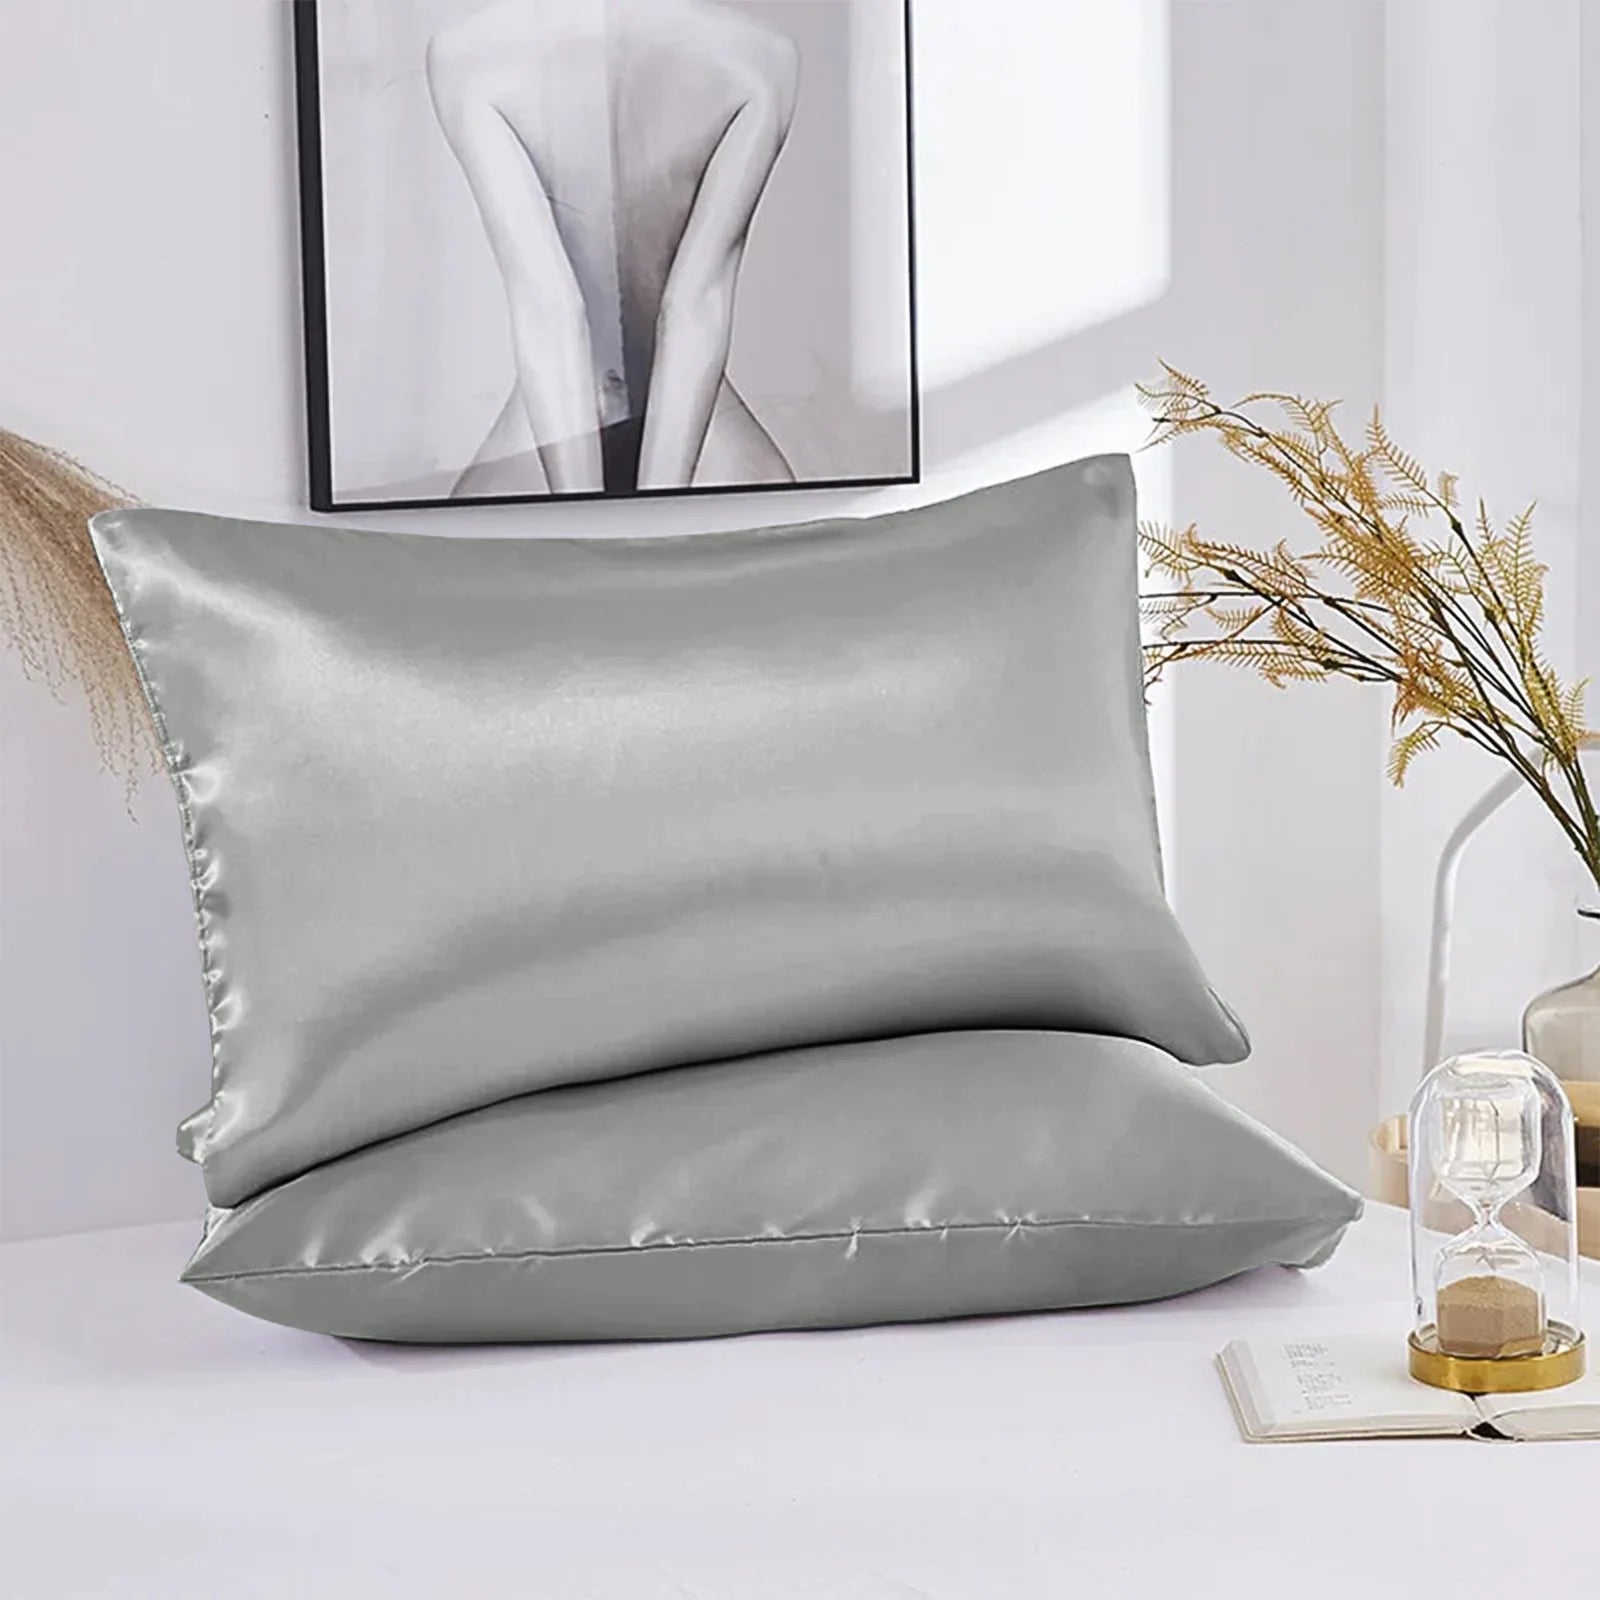 Satin Silk Pillowcase for Hair and Skin 2 Pack - Crowned by RoyaltyQueen